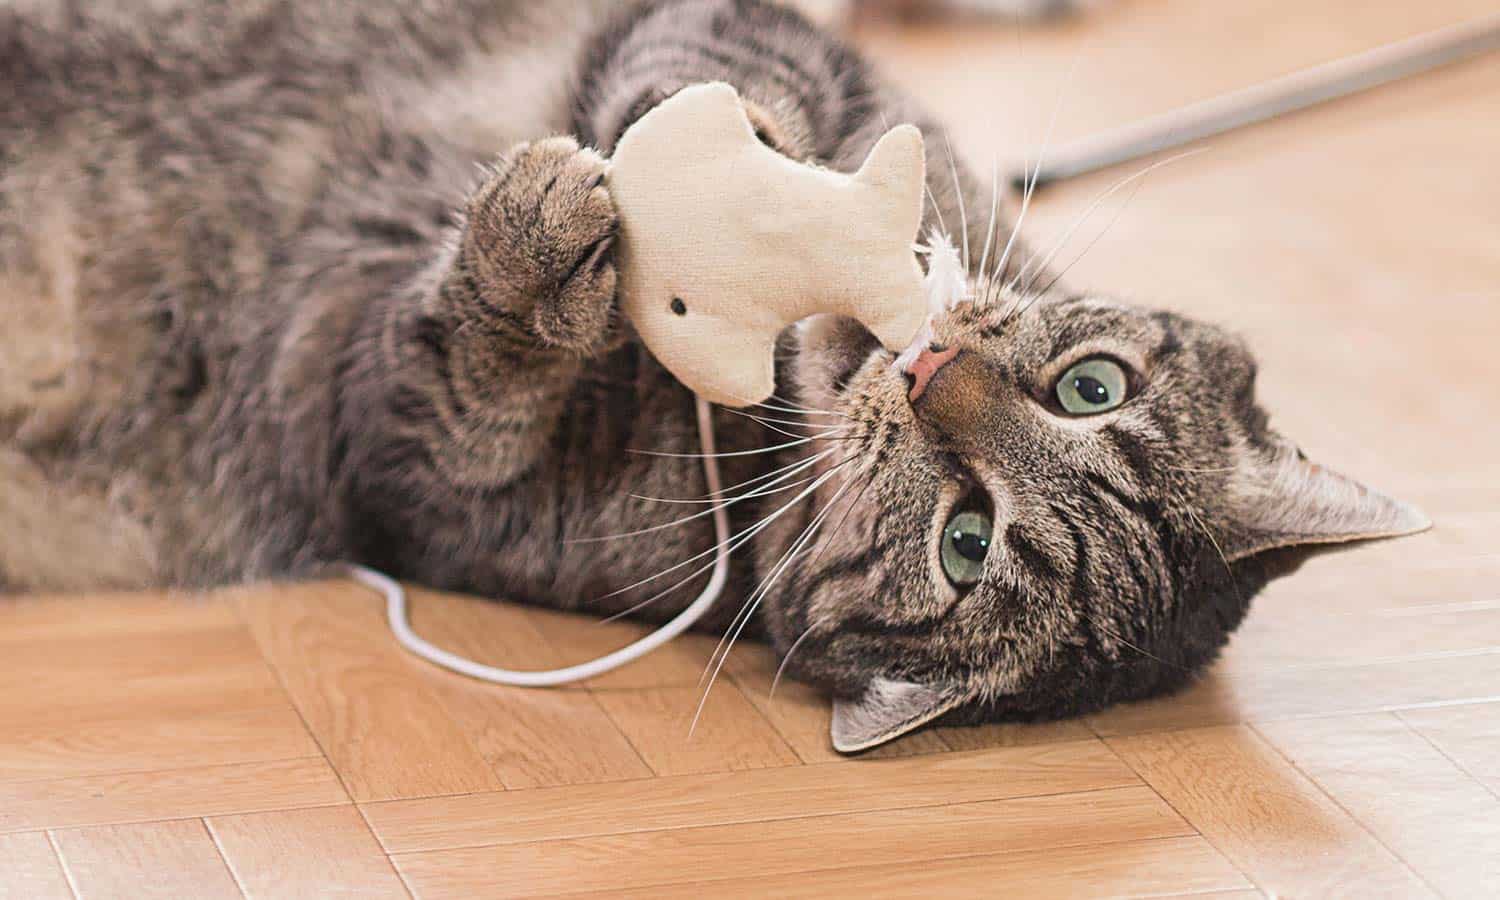 A cat playing with a toy mouse